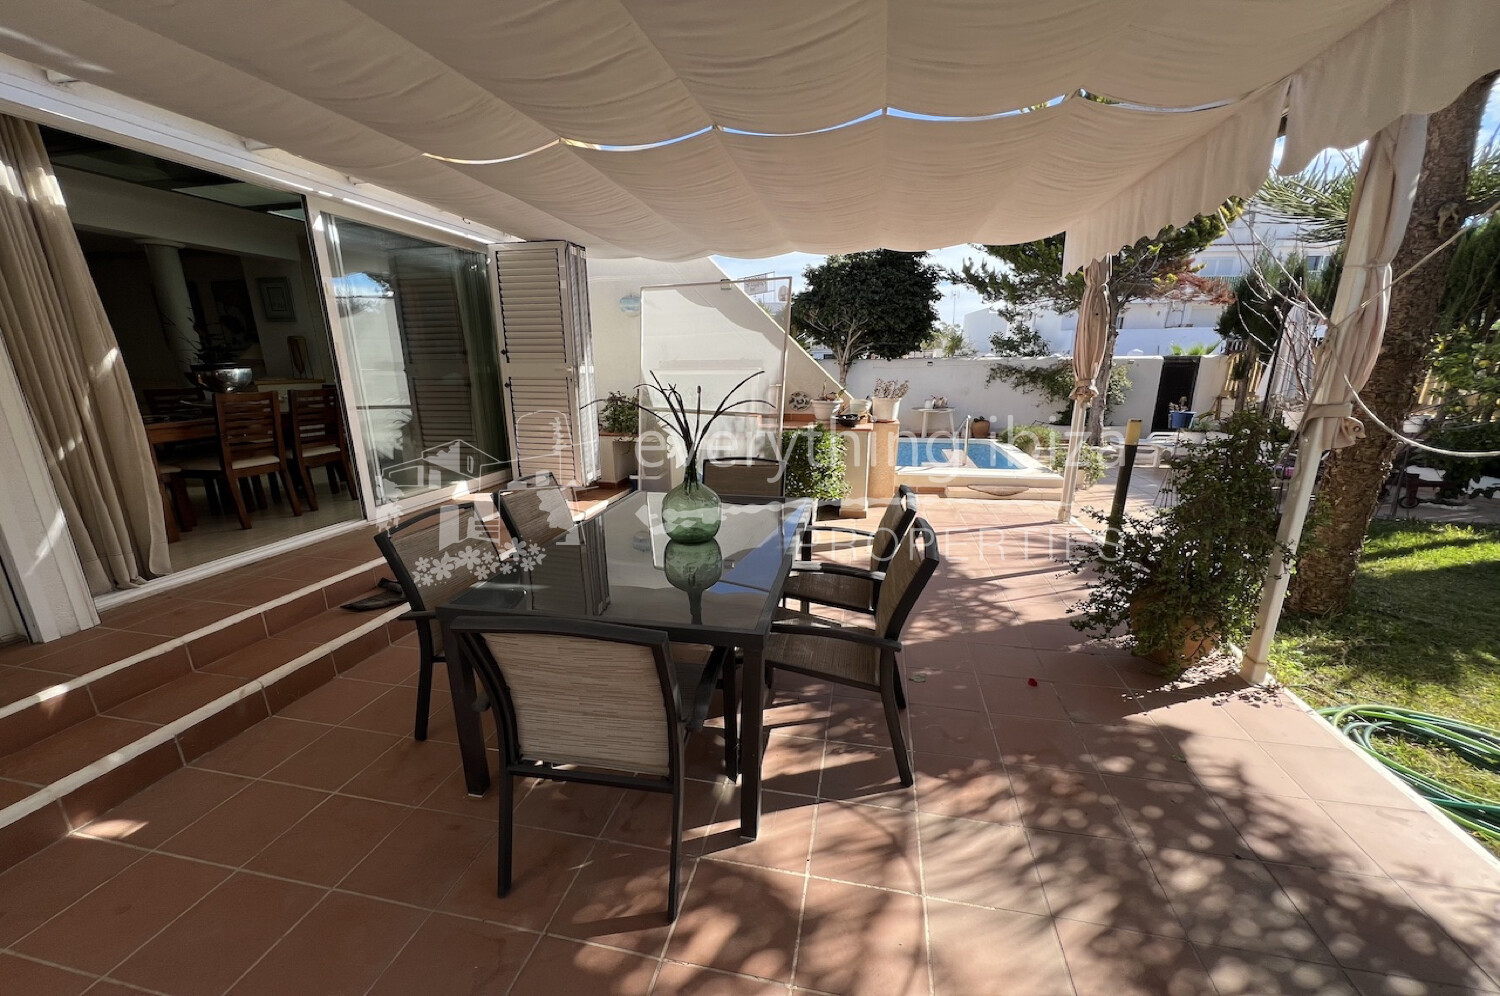 Townhouse Near Beach with Sunset Views, Private Pool and Gardens, ref. 1680, on sale in Ibiza by everything ibiza Properties